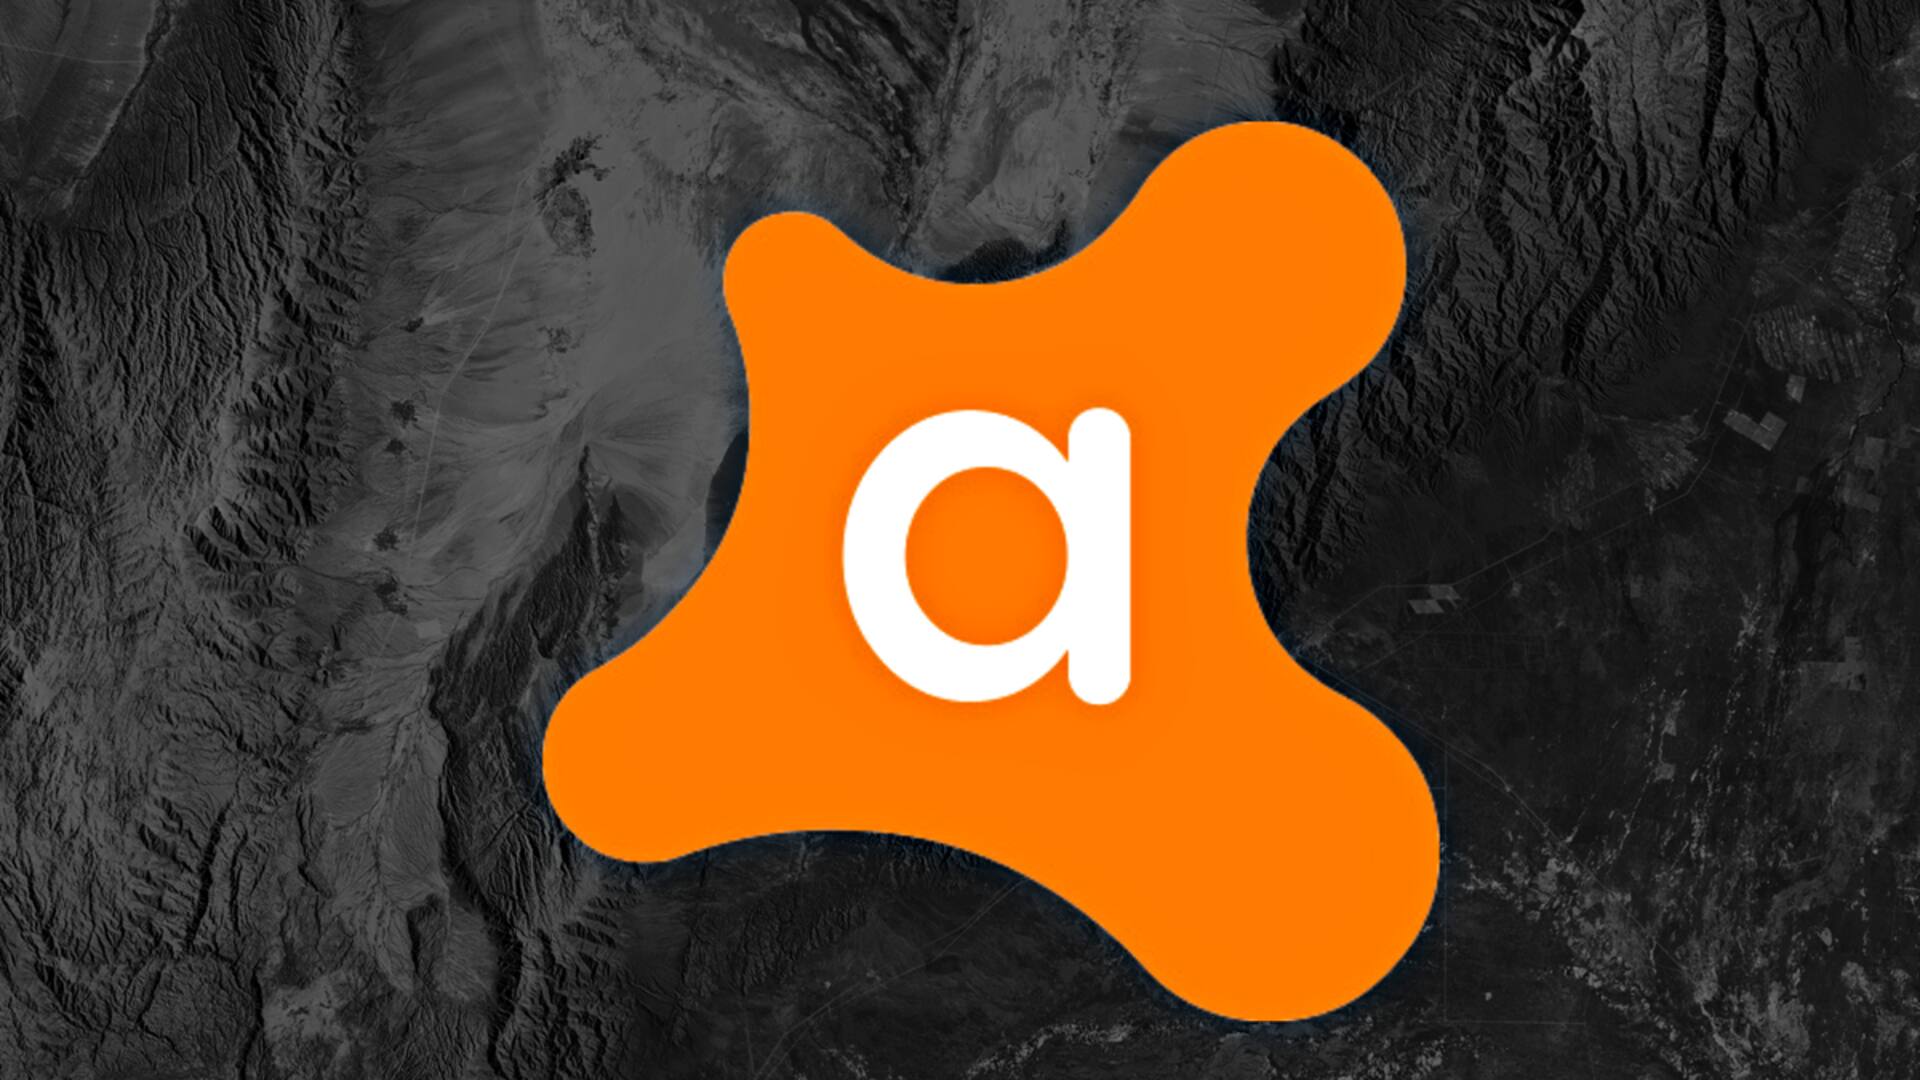 Privacy-focused Avast fined $16.5 million for secretly selling user data